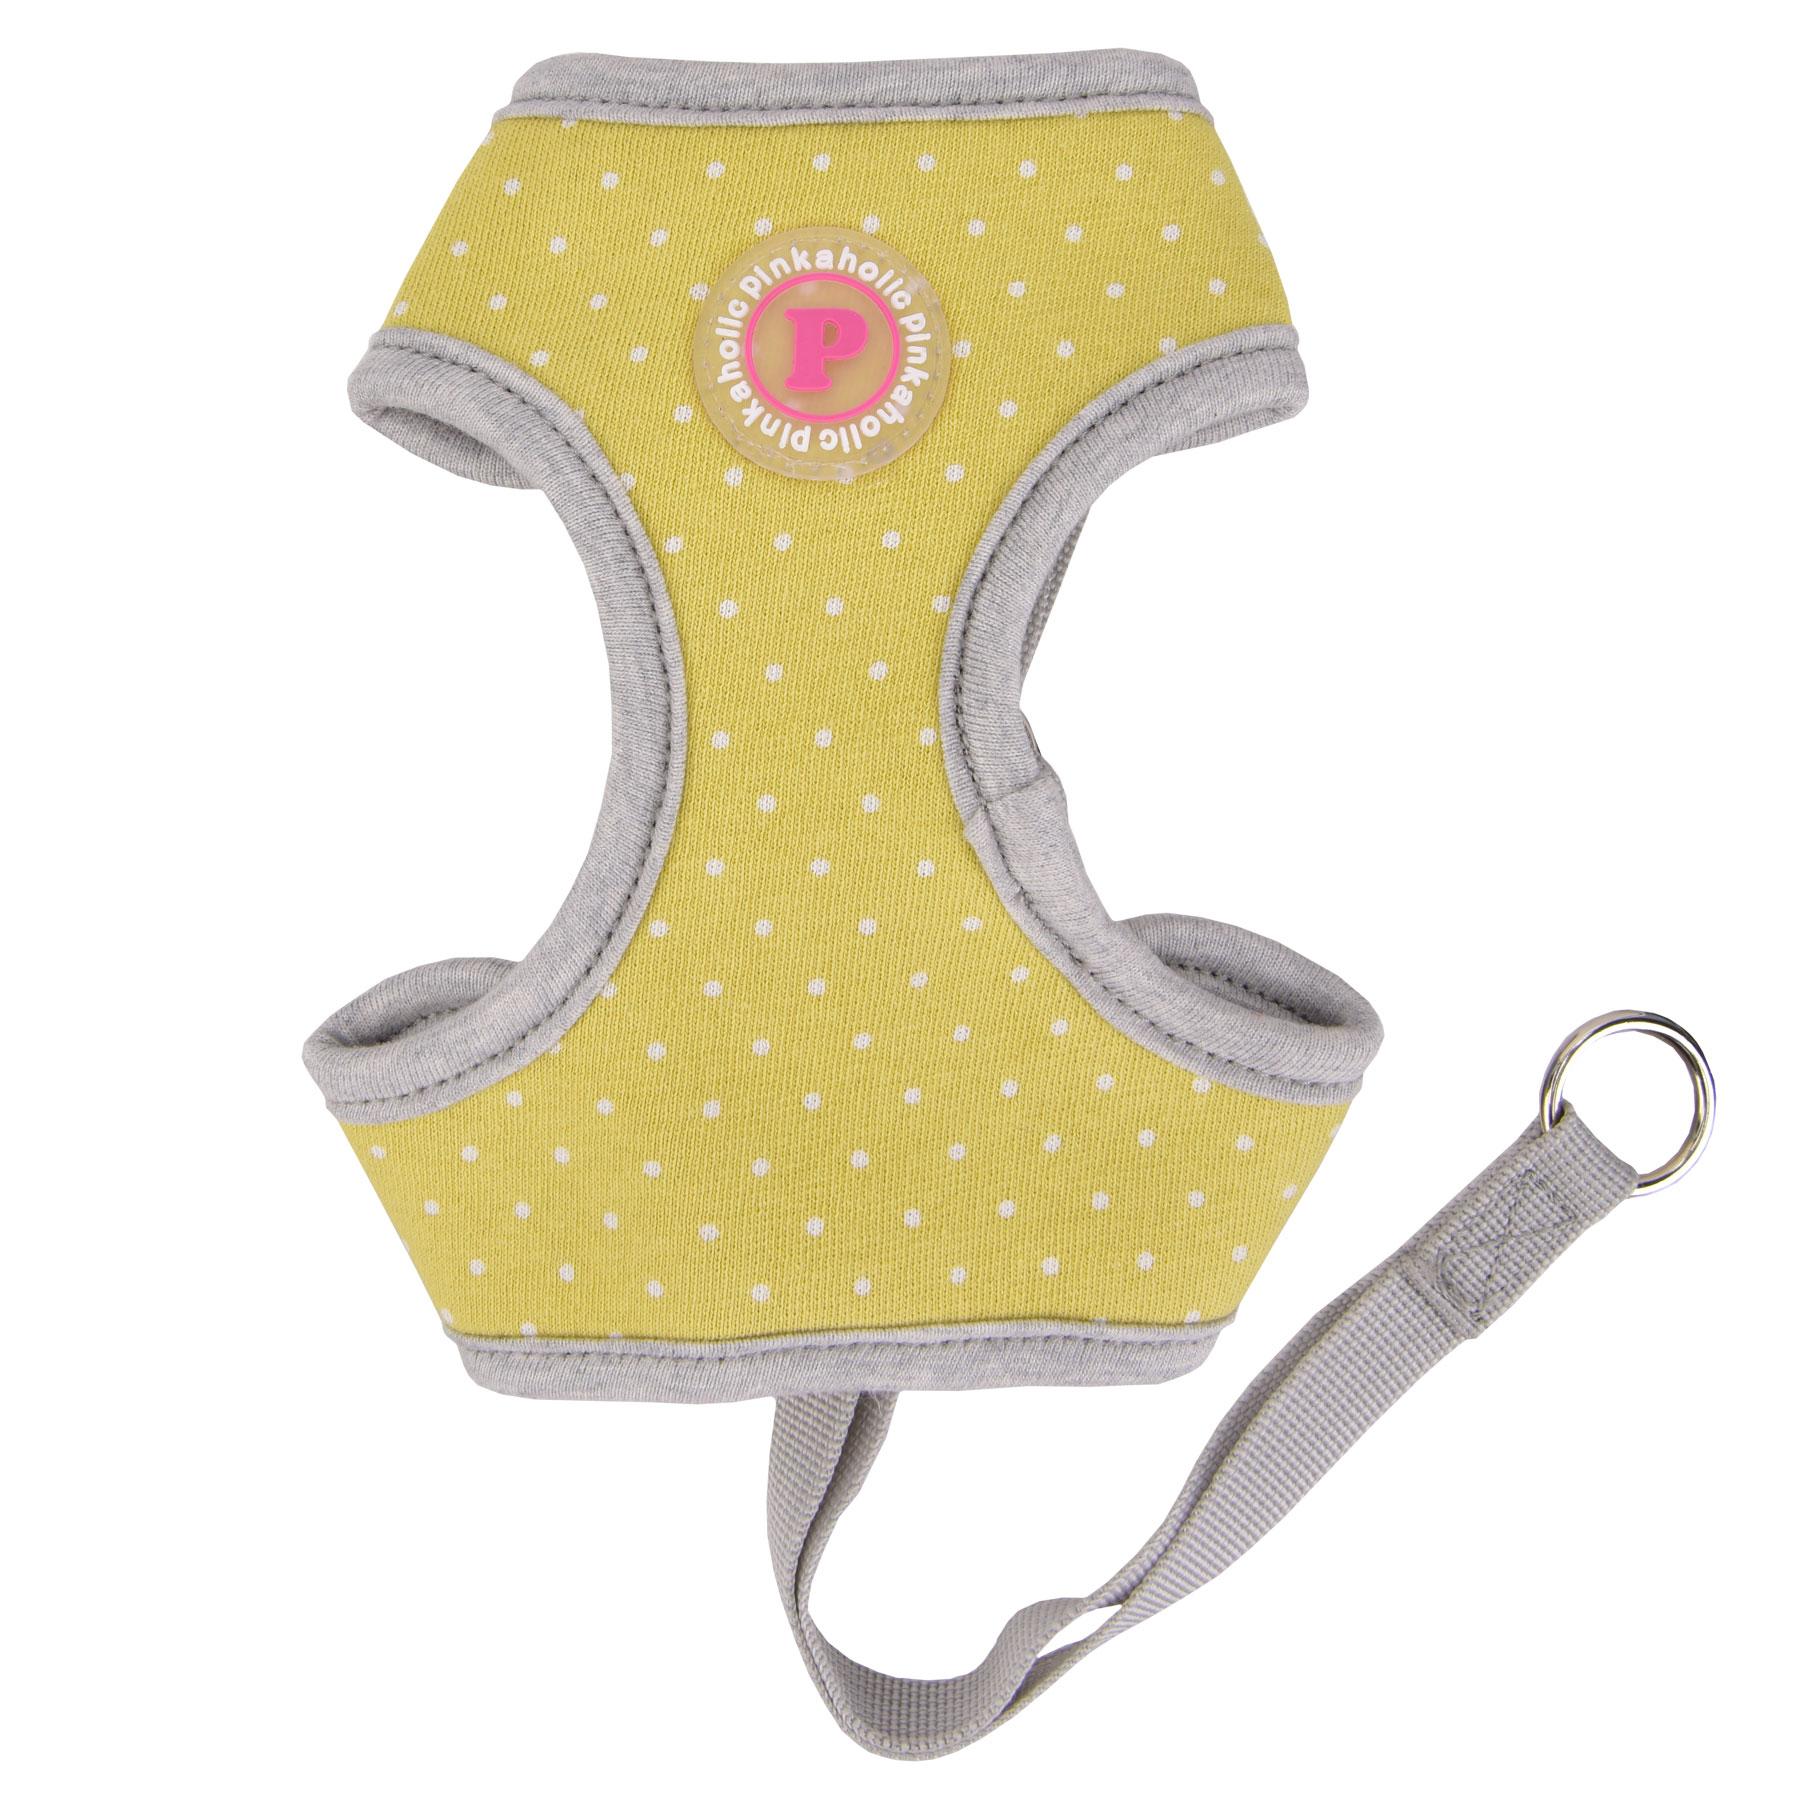 Lalo Comfort Dog Harness by Pinkaholic - Lime